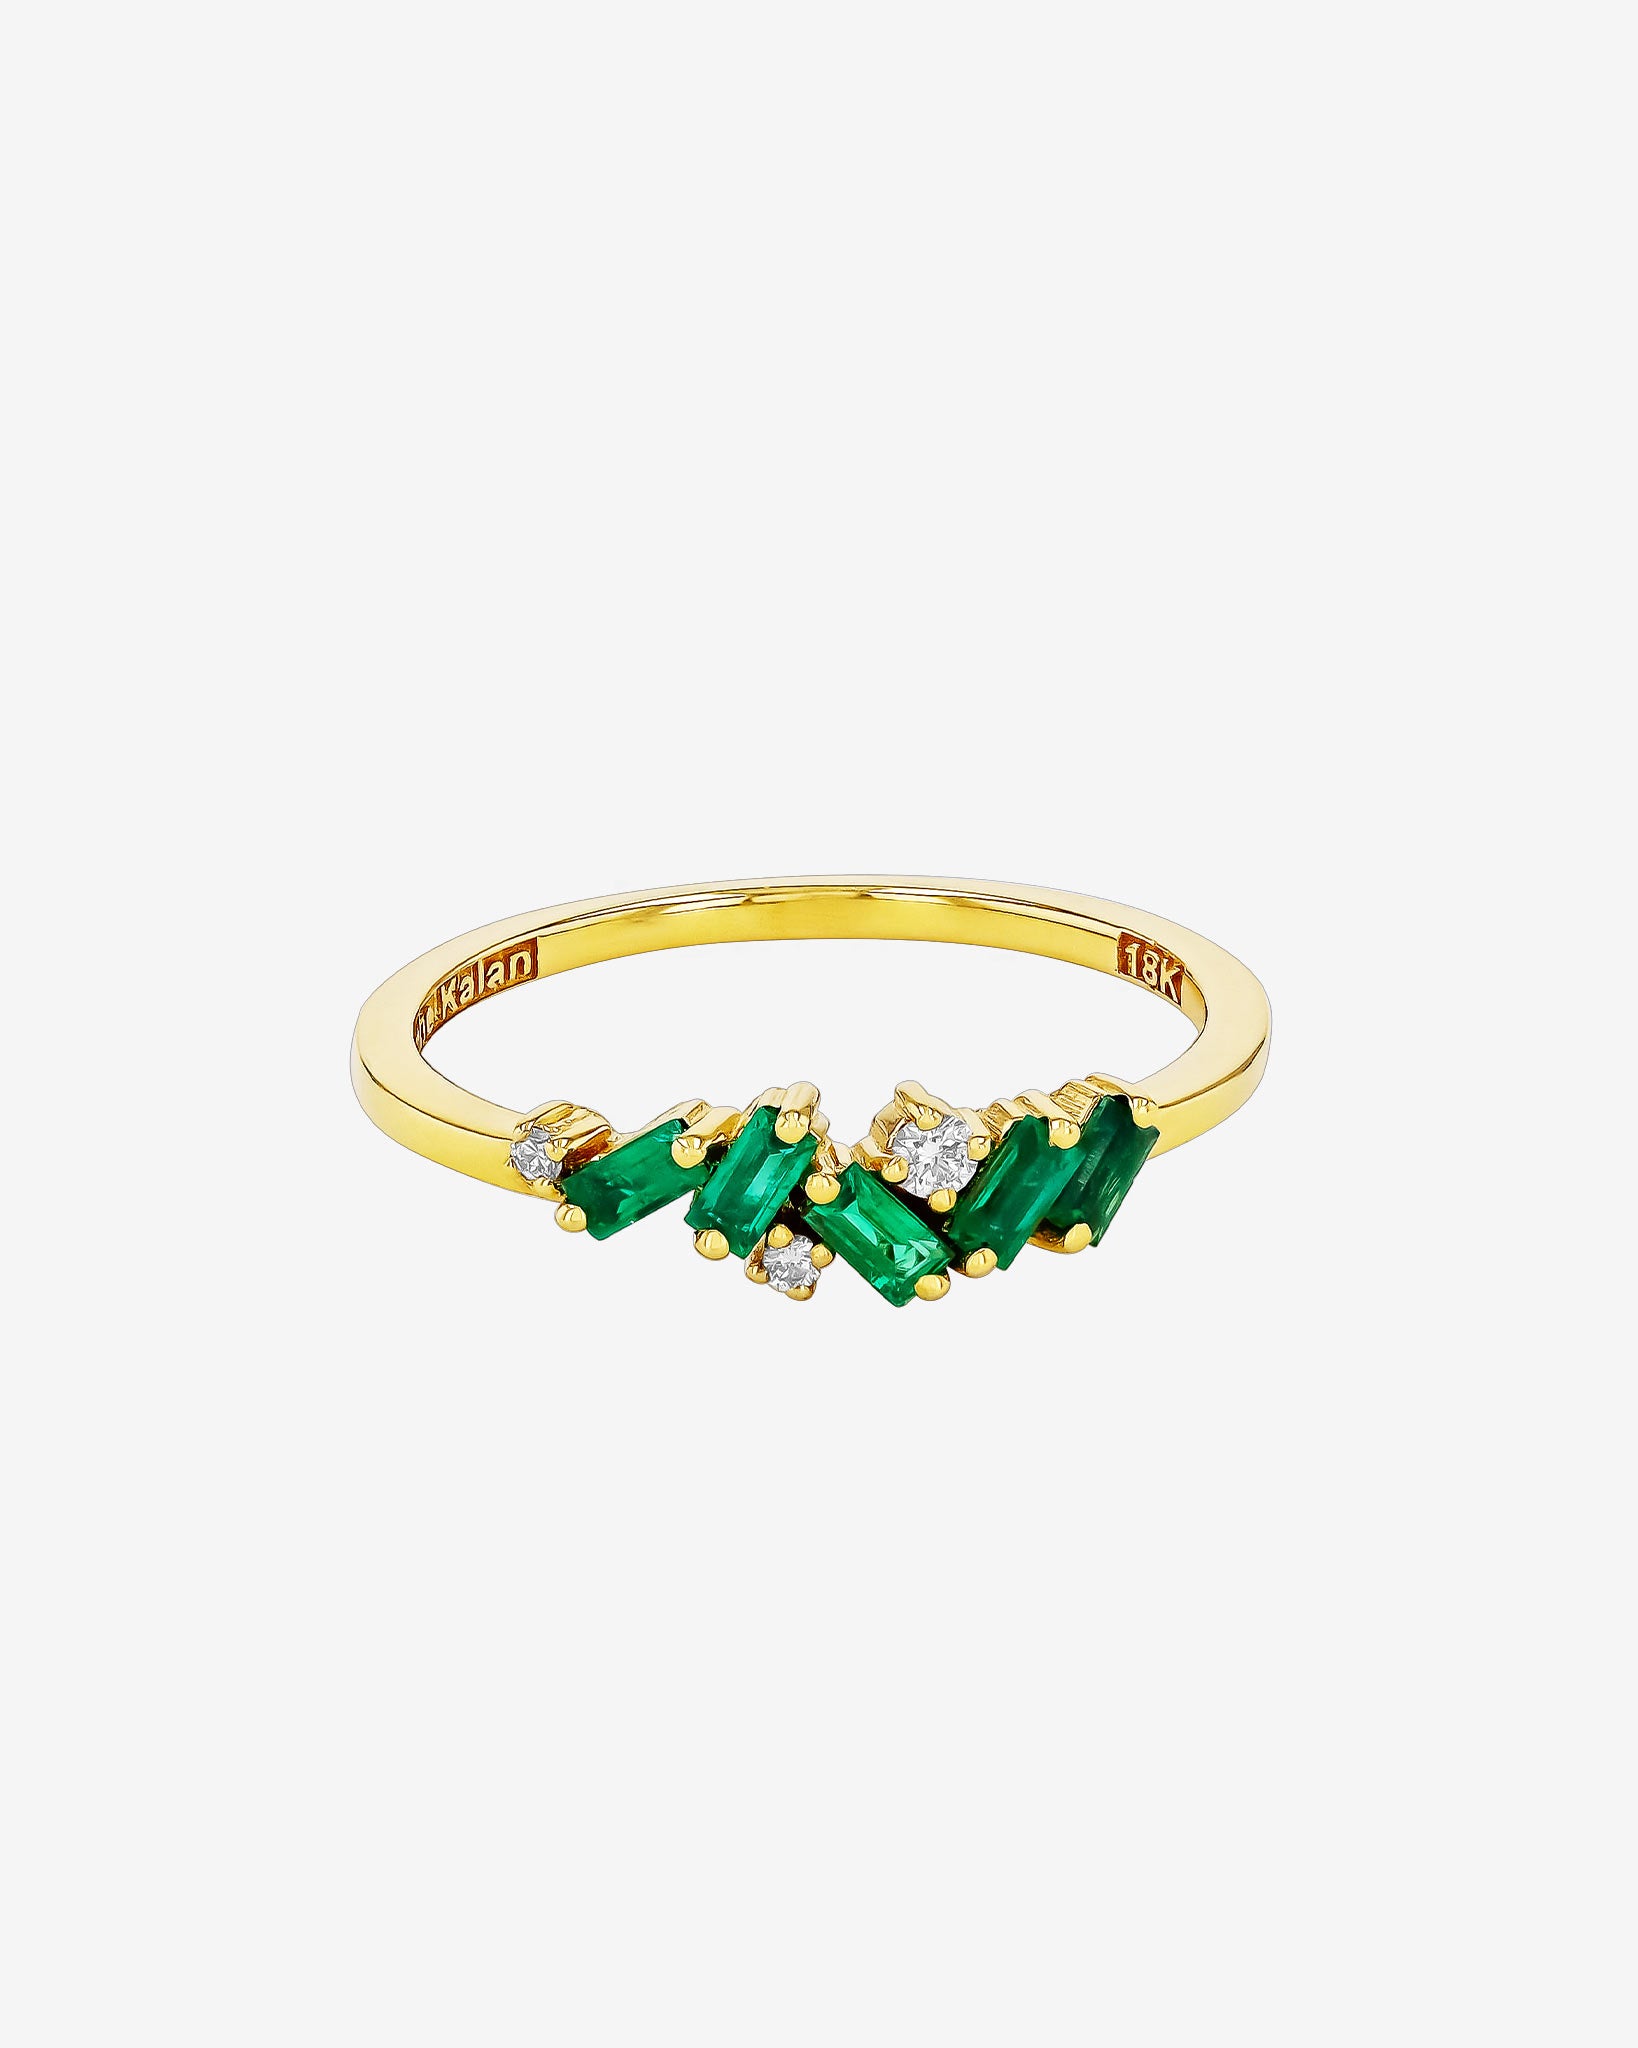 Suzanne Kalan Frenzy Emerald Ring in 18k yellow gold